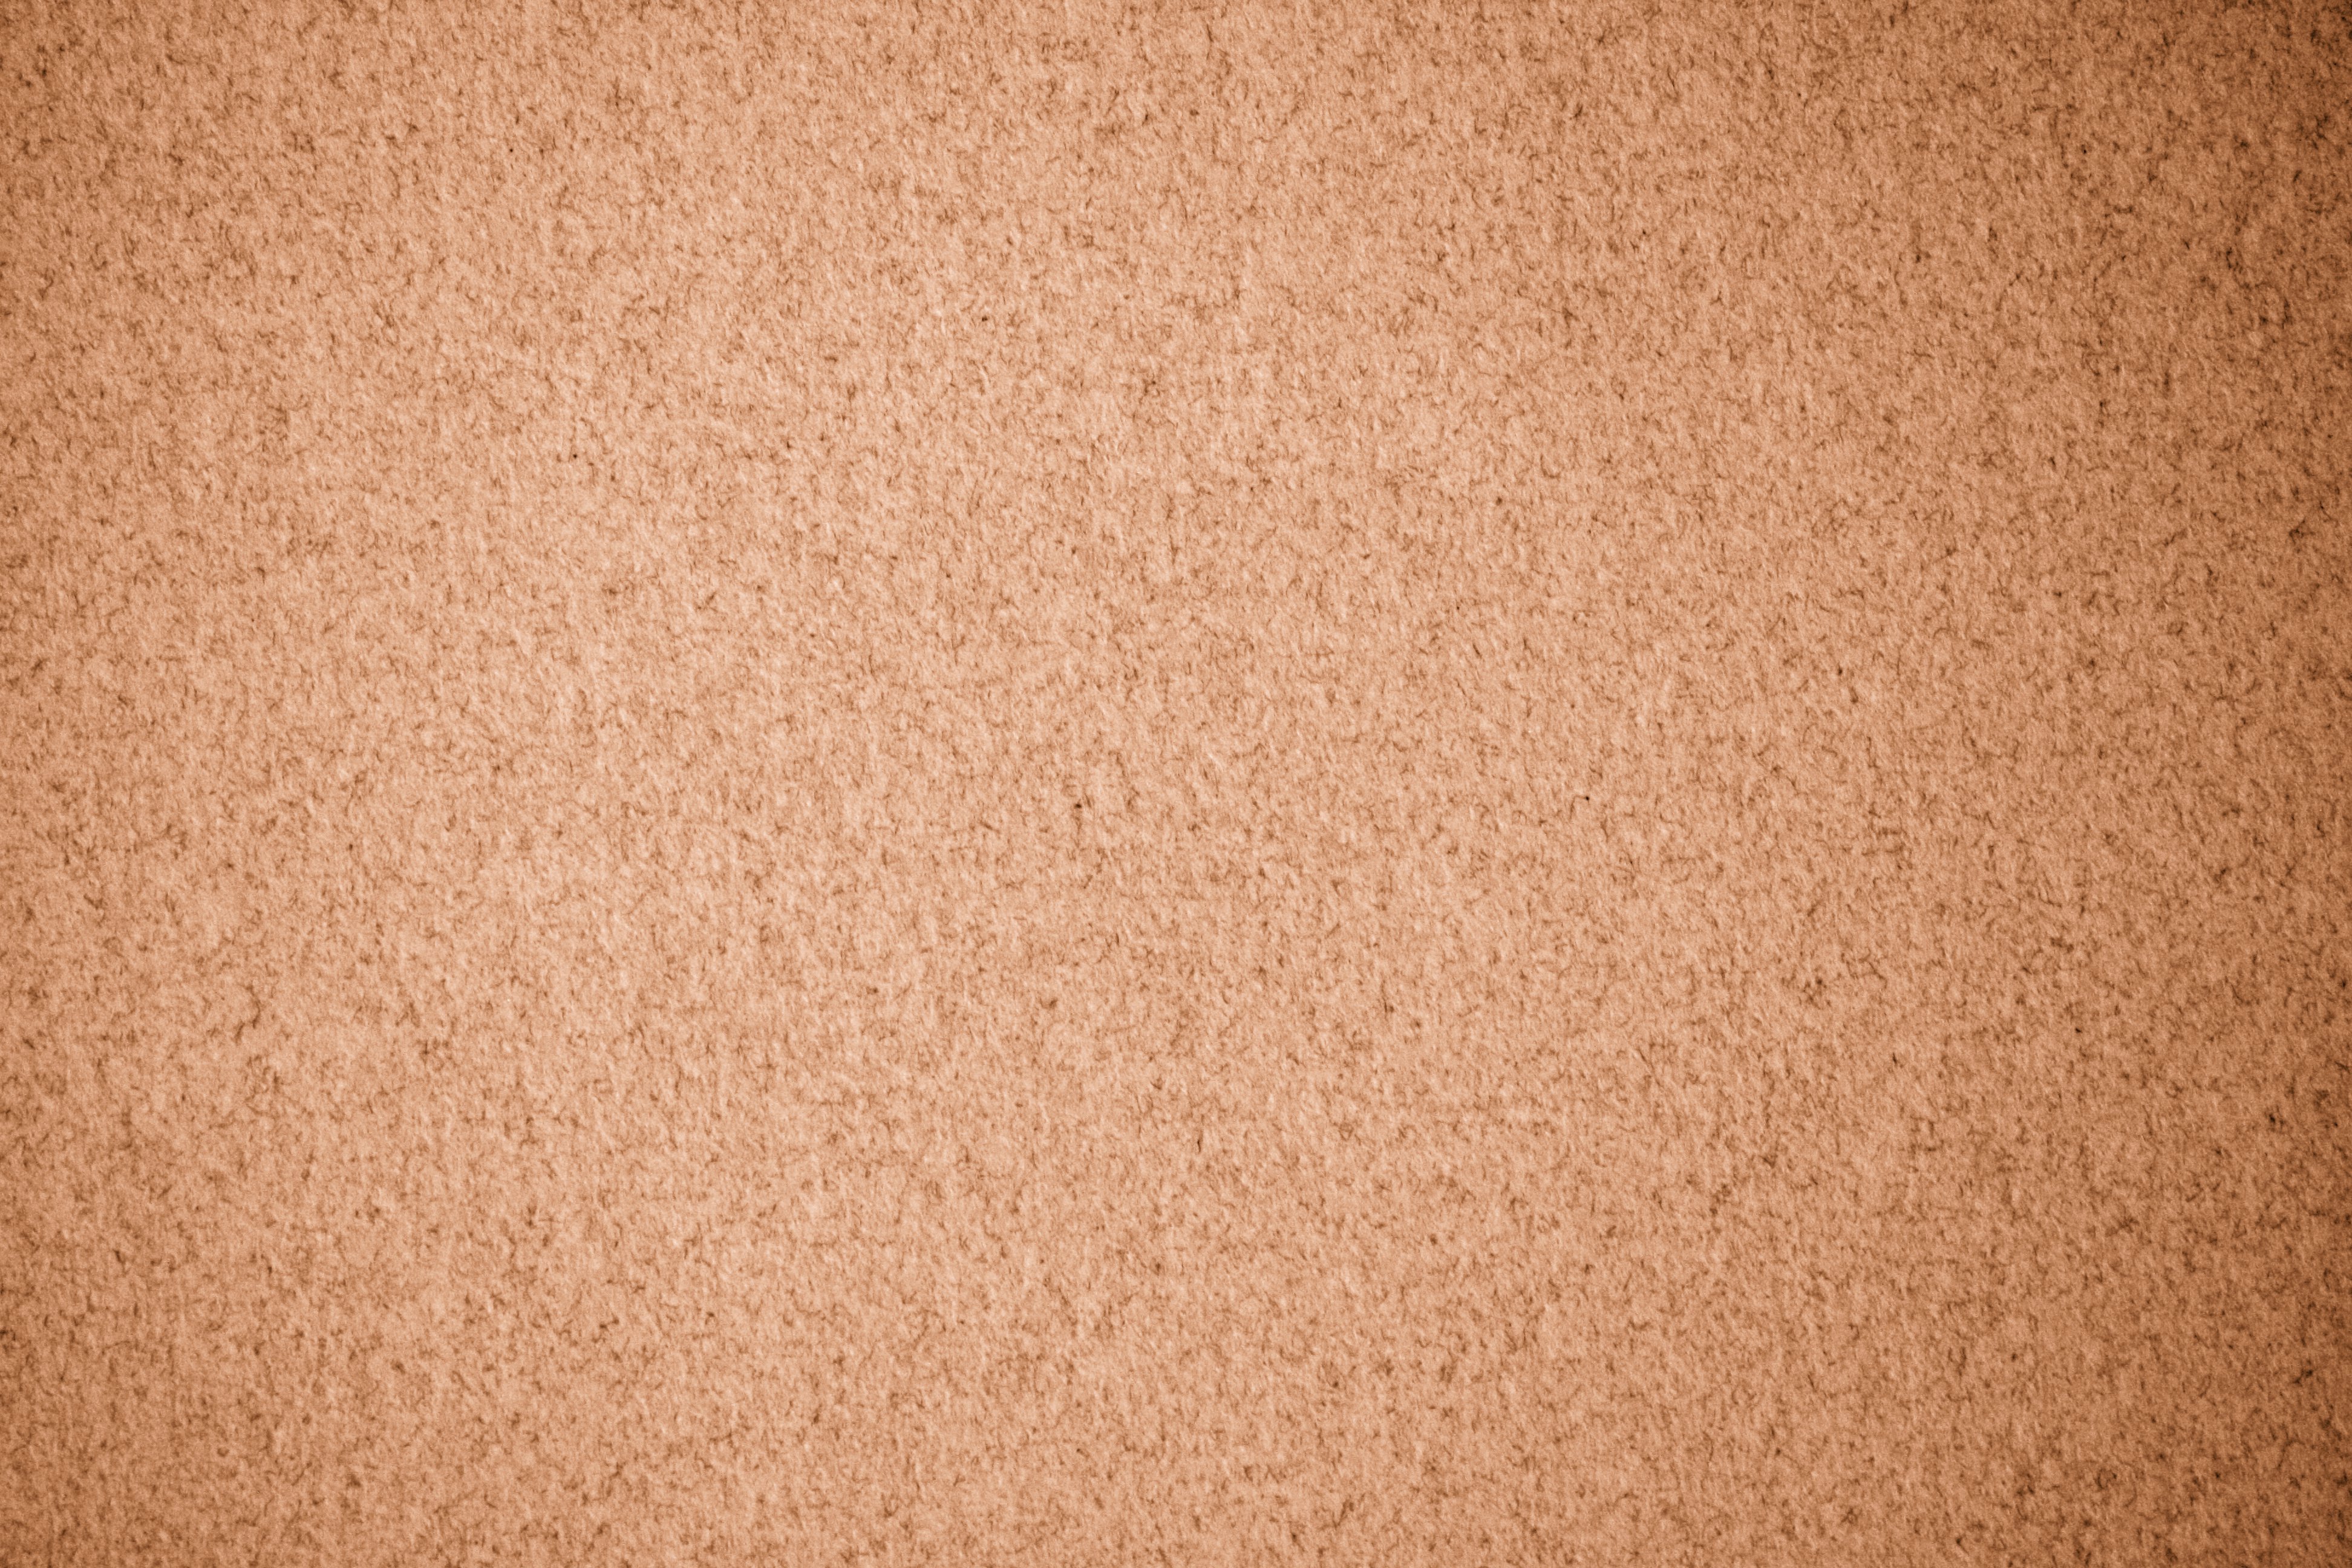 Light Brown or Tan Paper Texture with Flecks Picture, Free Photograph